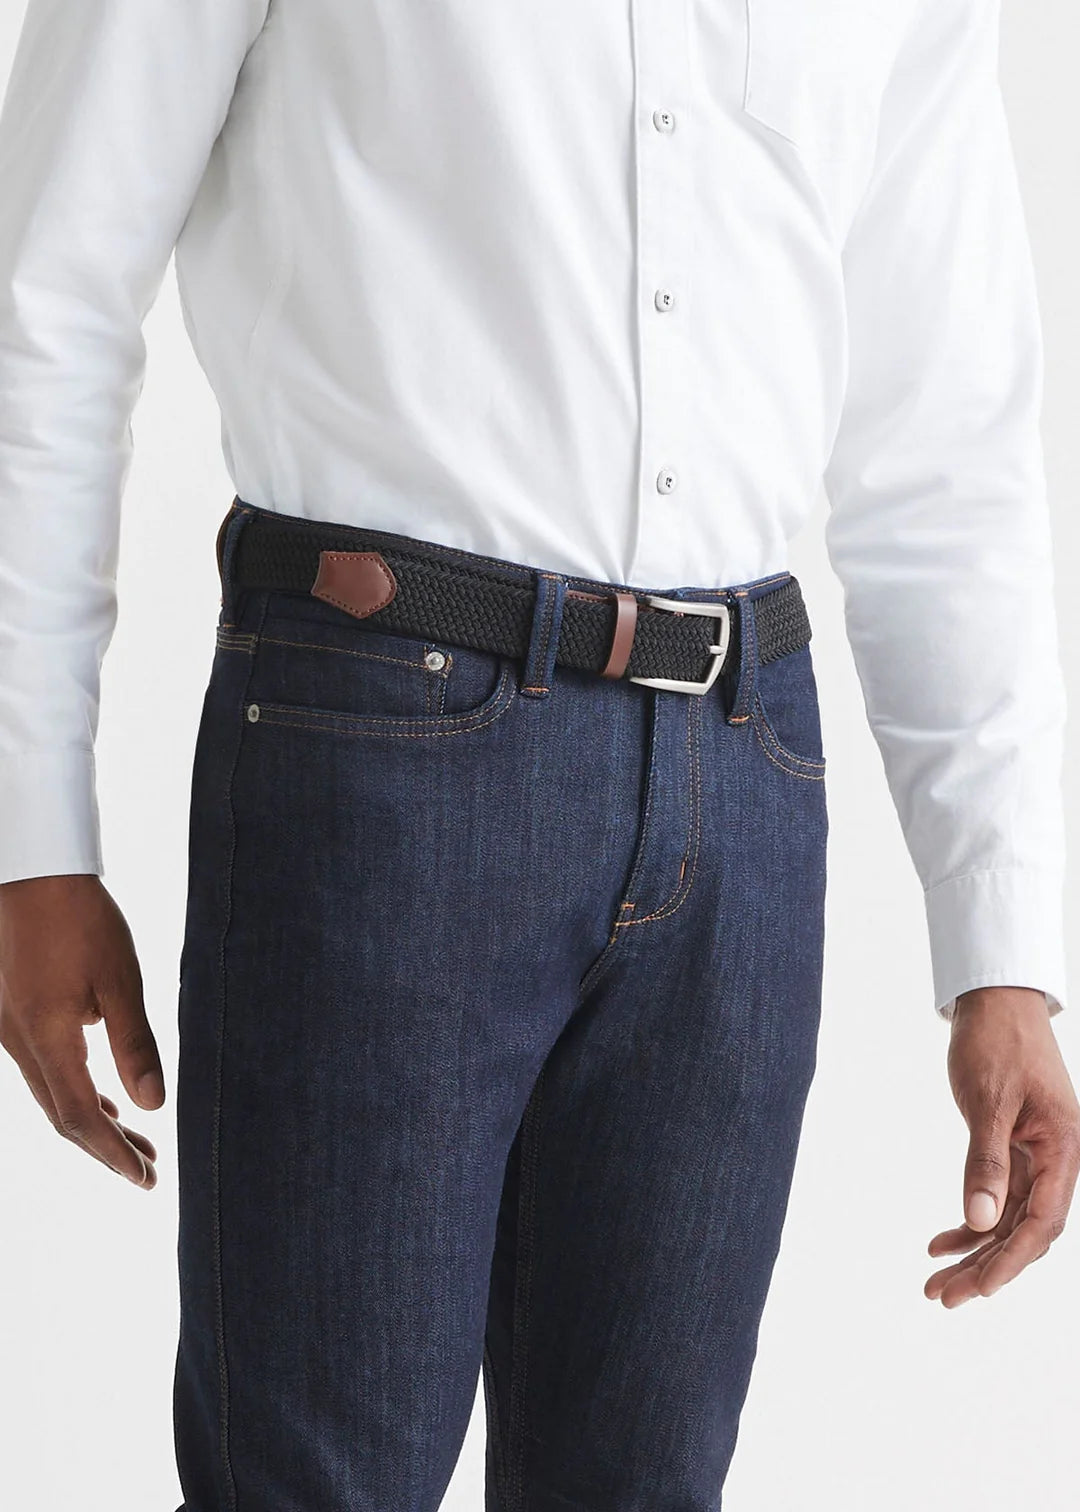 Front view of a man wearing the  Performance Stretch Belt by DU/ER in colors Black/Brown